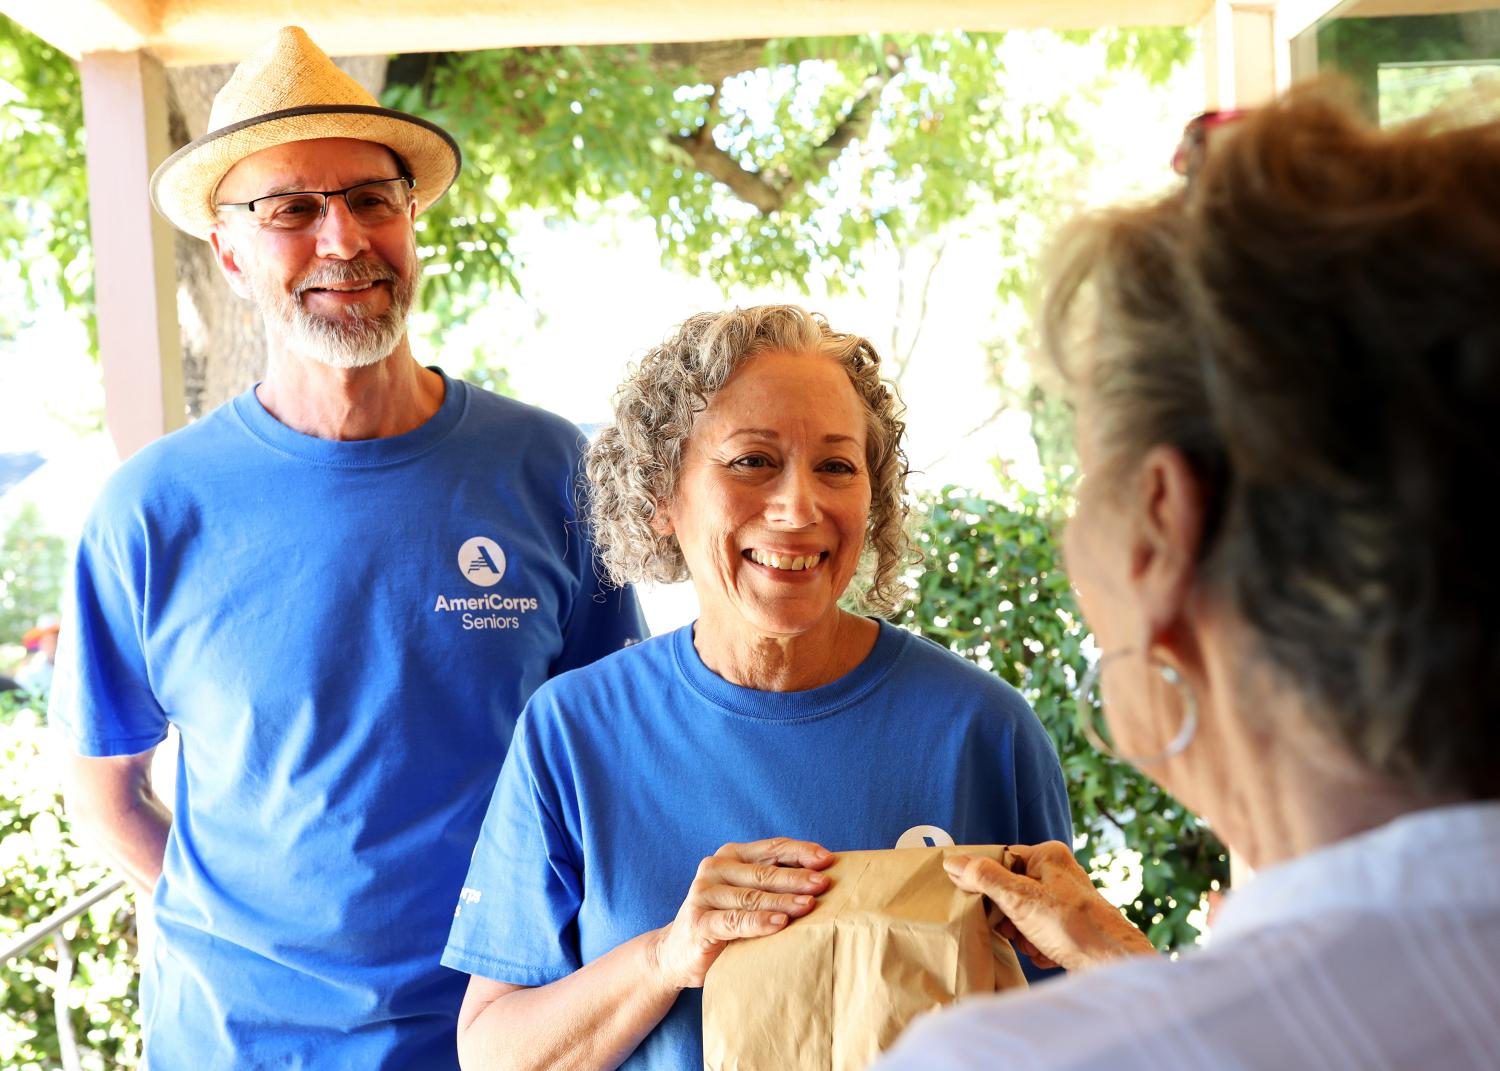 AmeriCorps Seniors volunteers deliver meals to another older American.